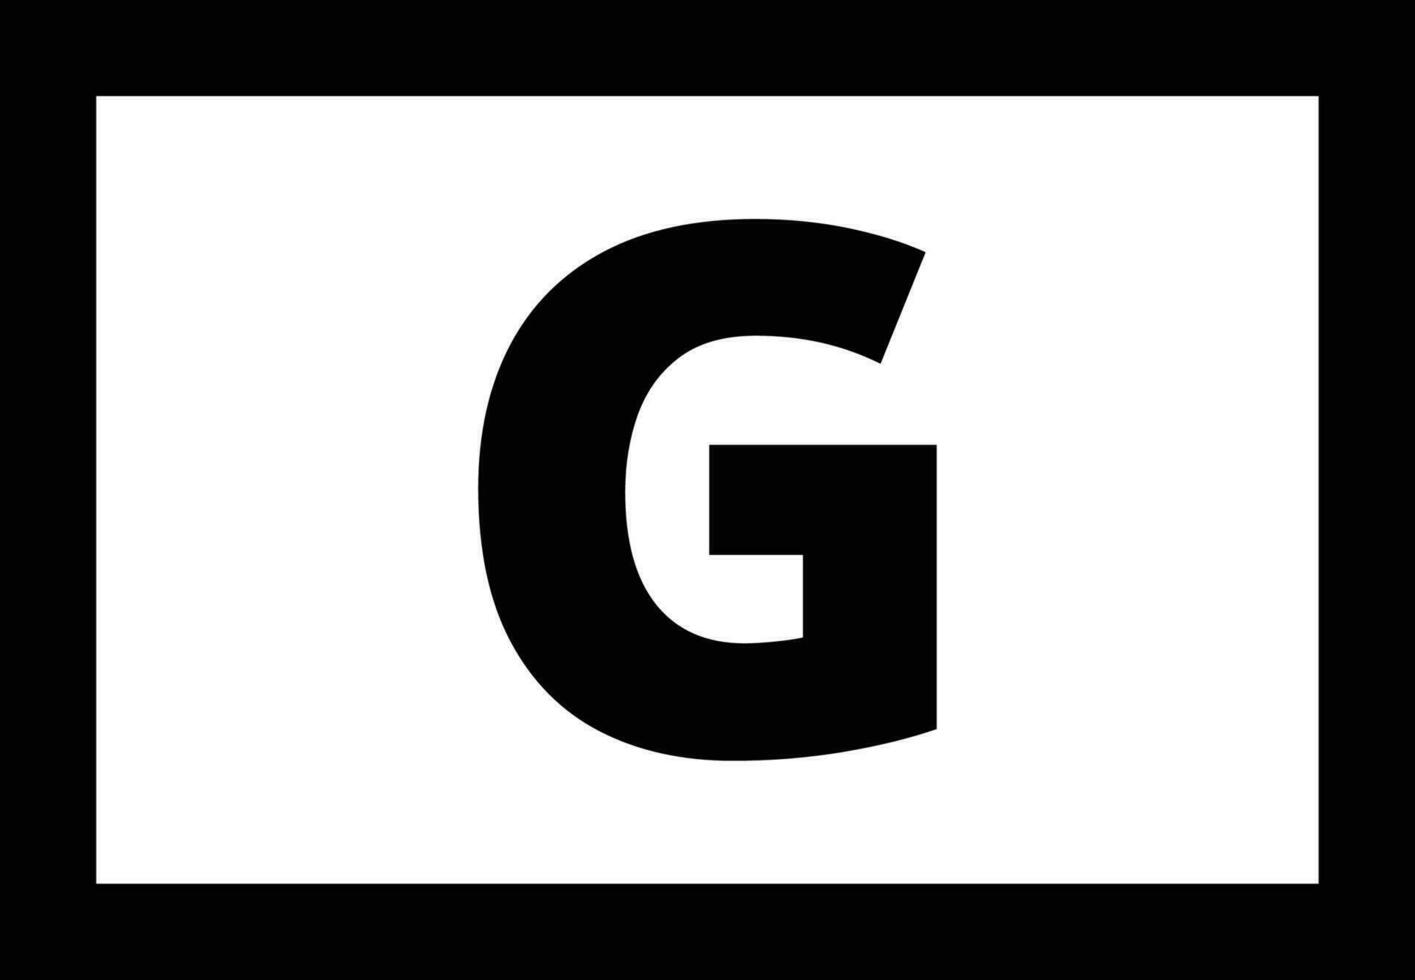 G movie rating sign vector